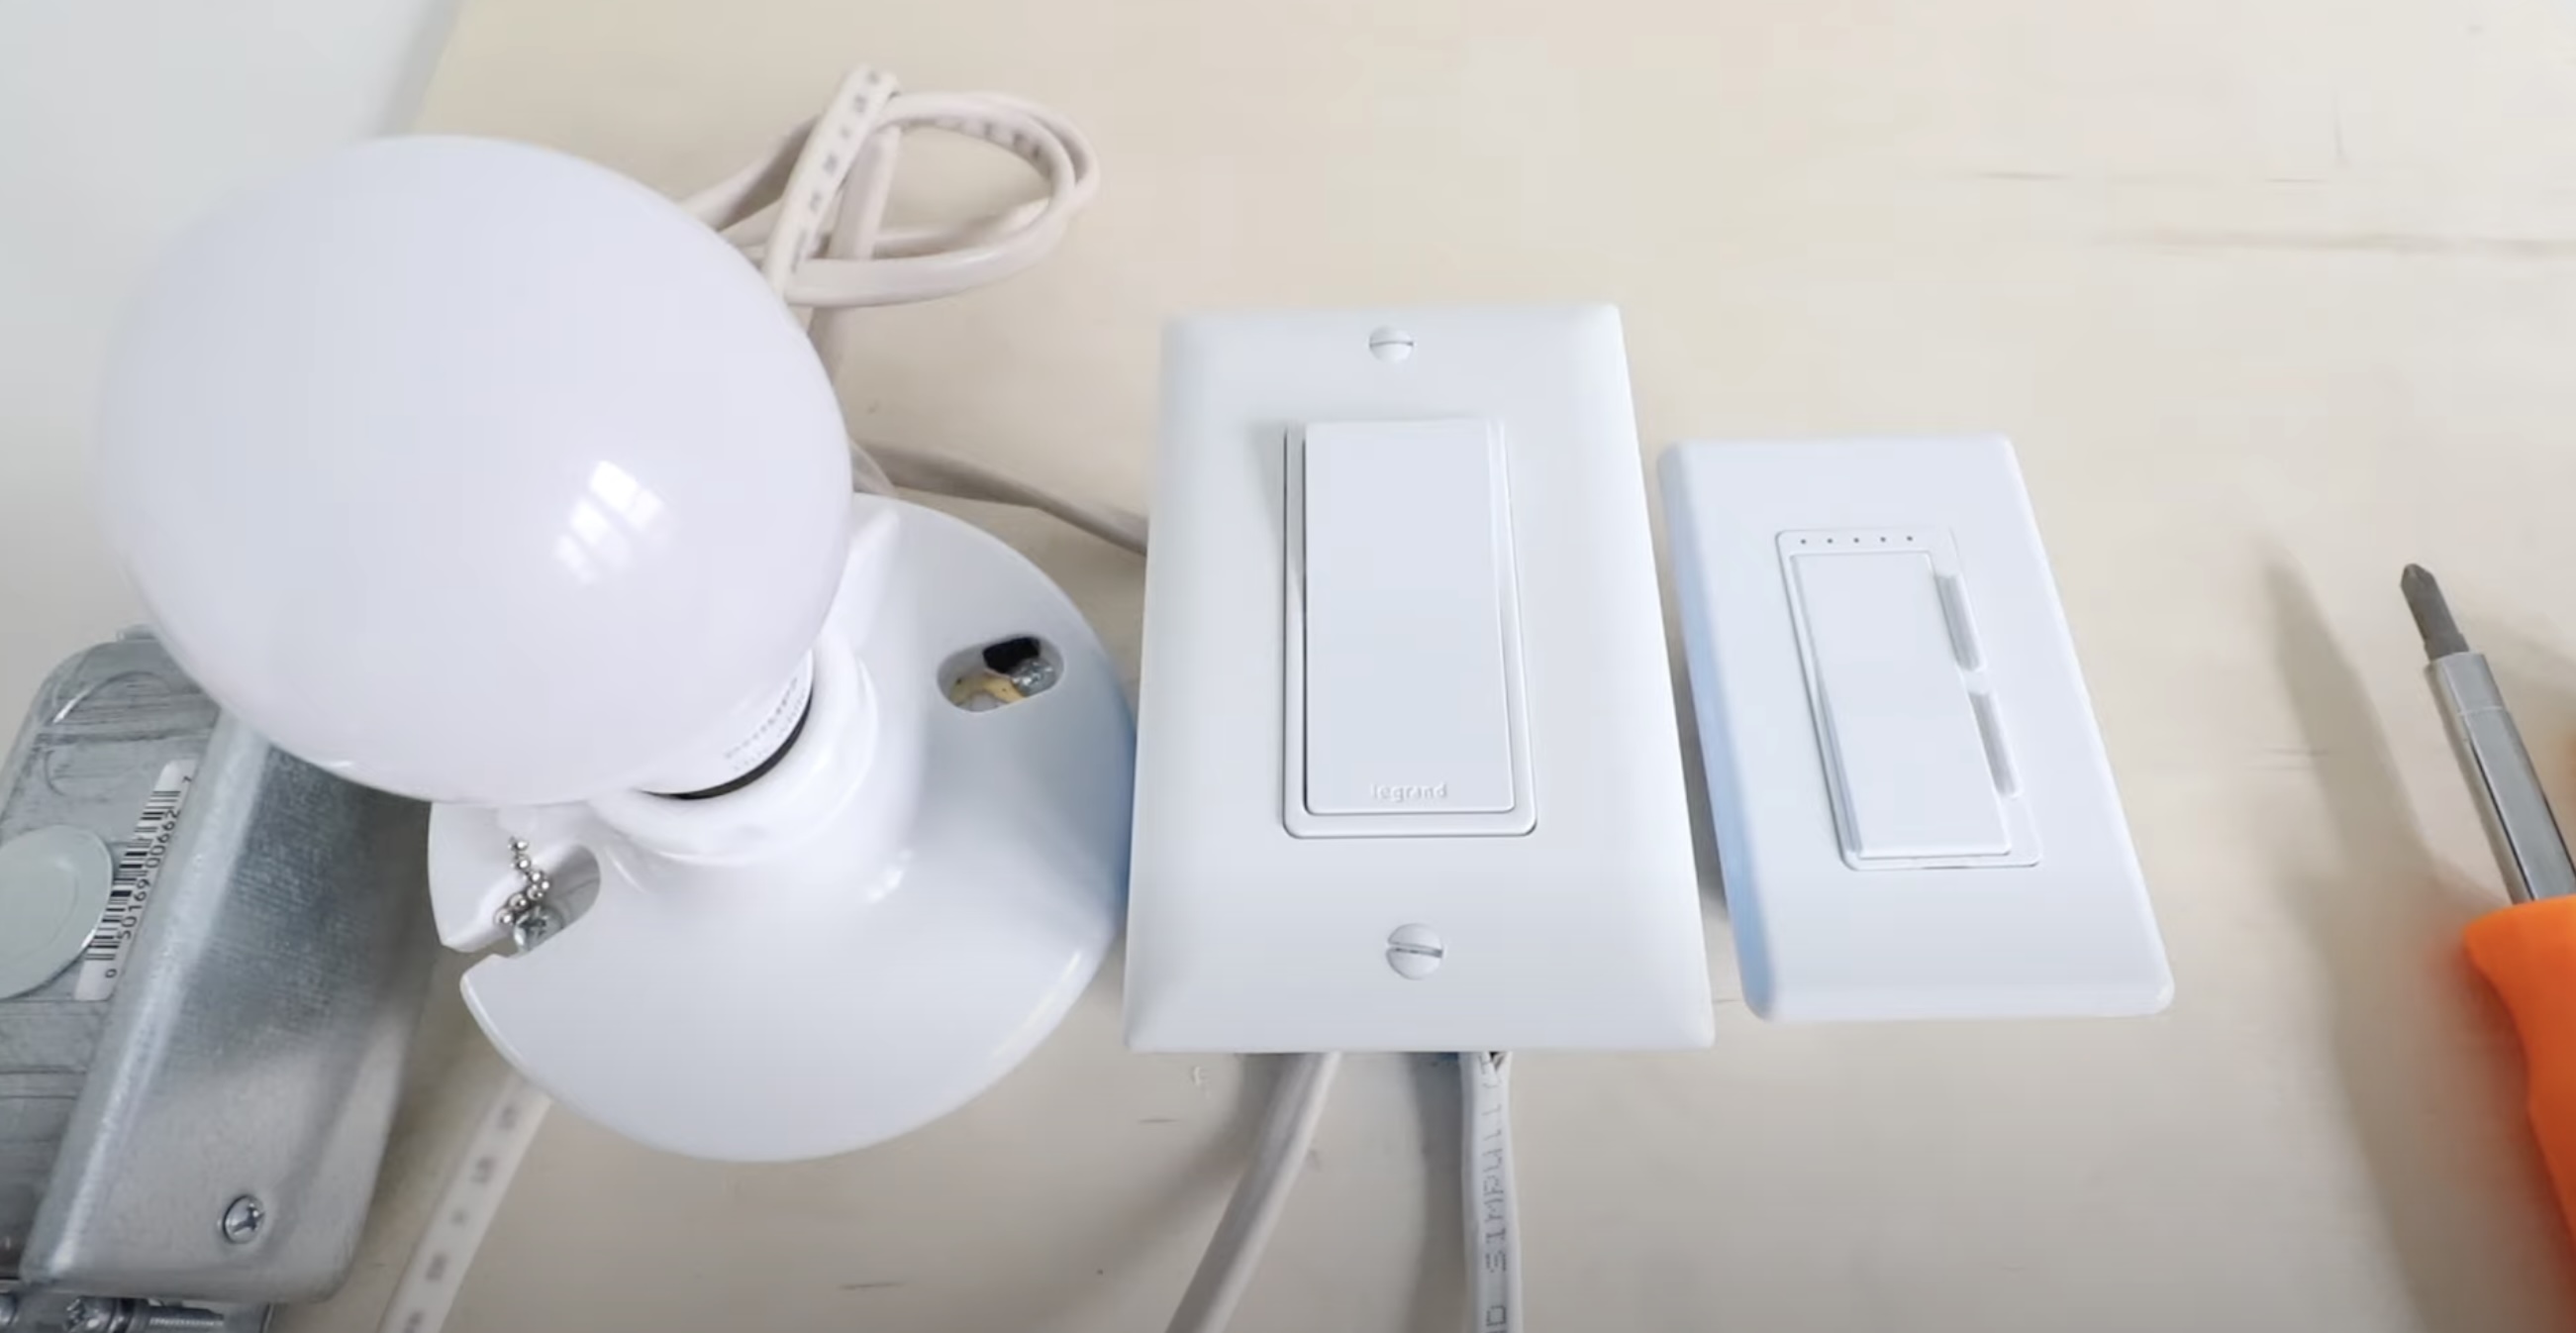 How To Install A Feit Dimmer Switch